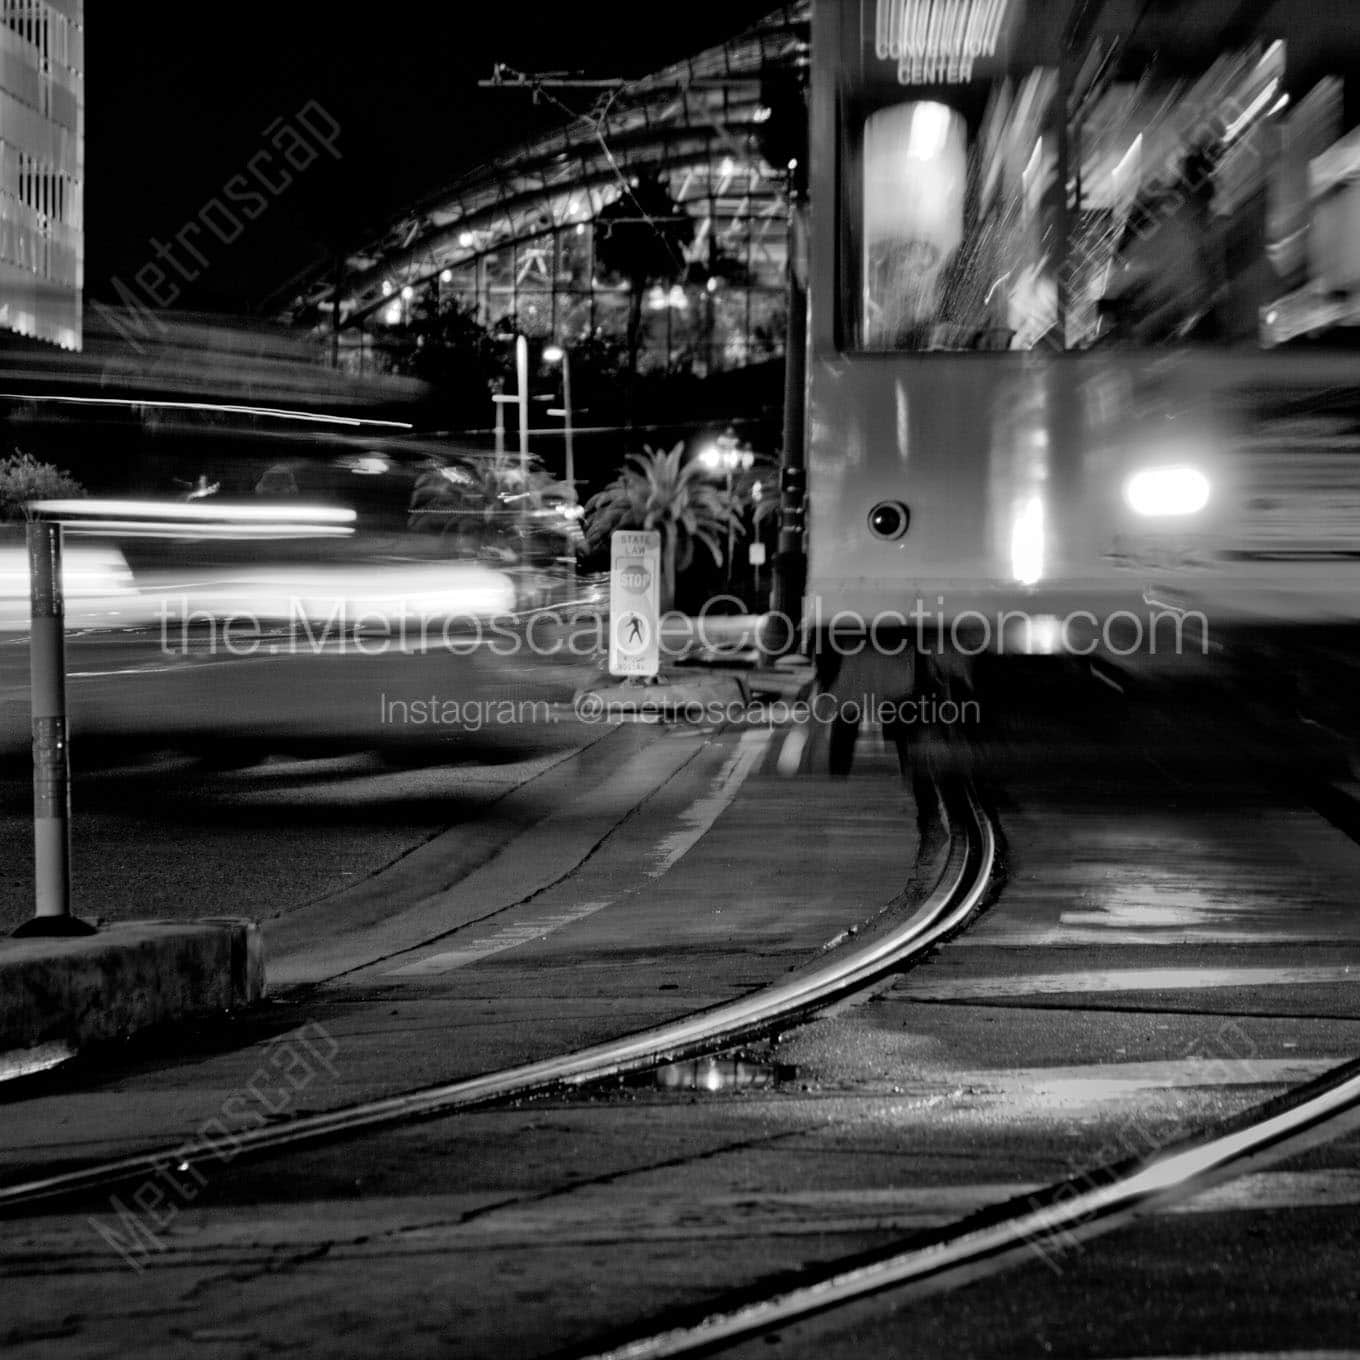 taxi and street car channelside Black & White Wall Art